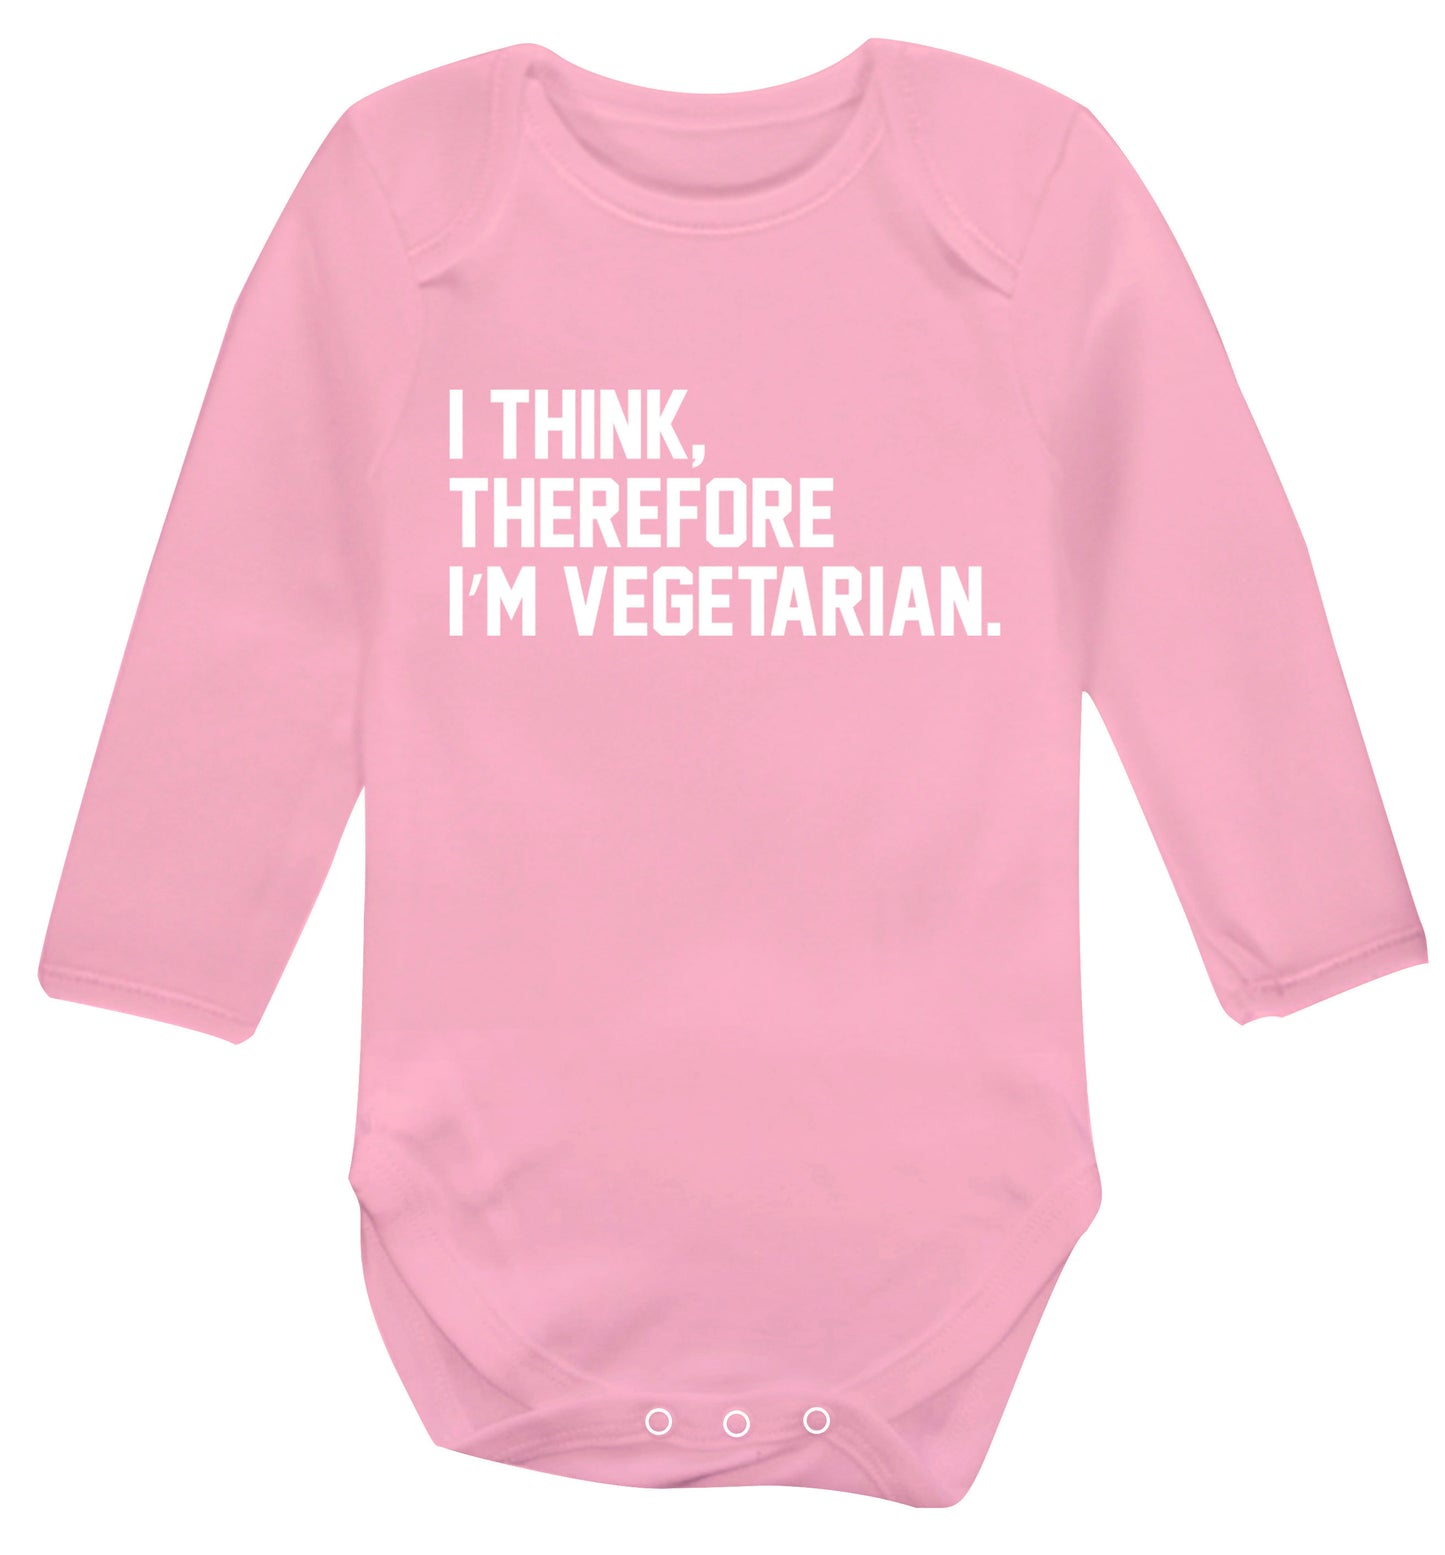 I think therefore I'm vegetarian Baby Vest long sleeved pale pink 6-12 months